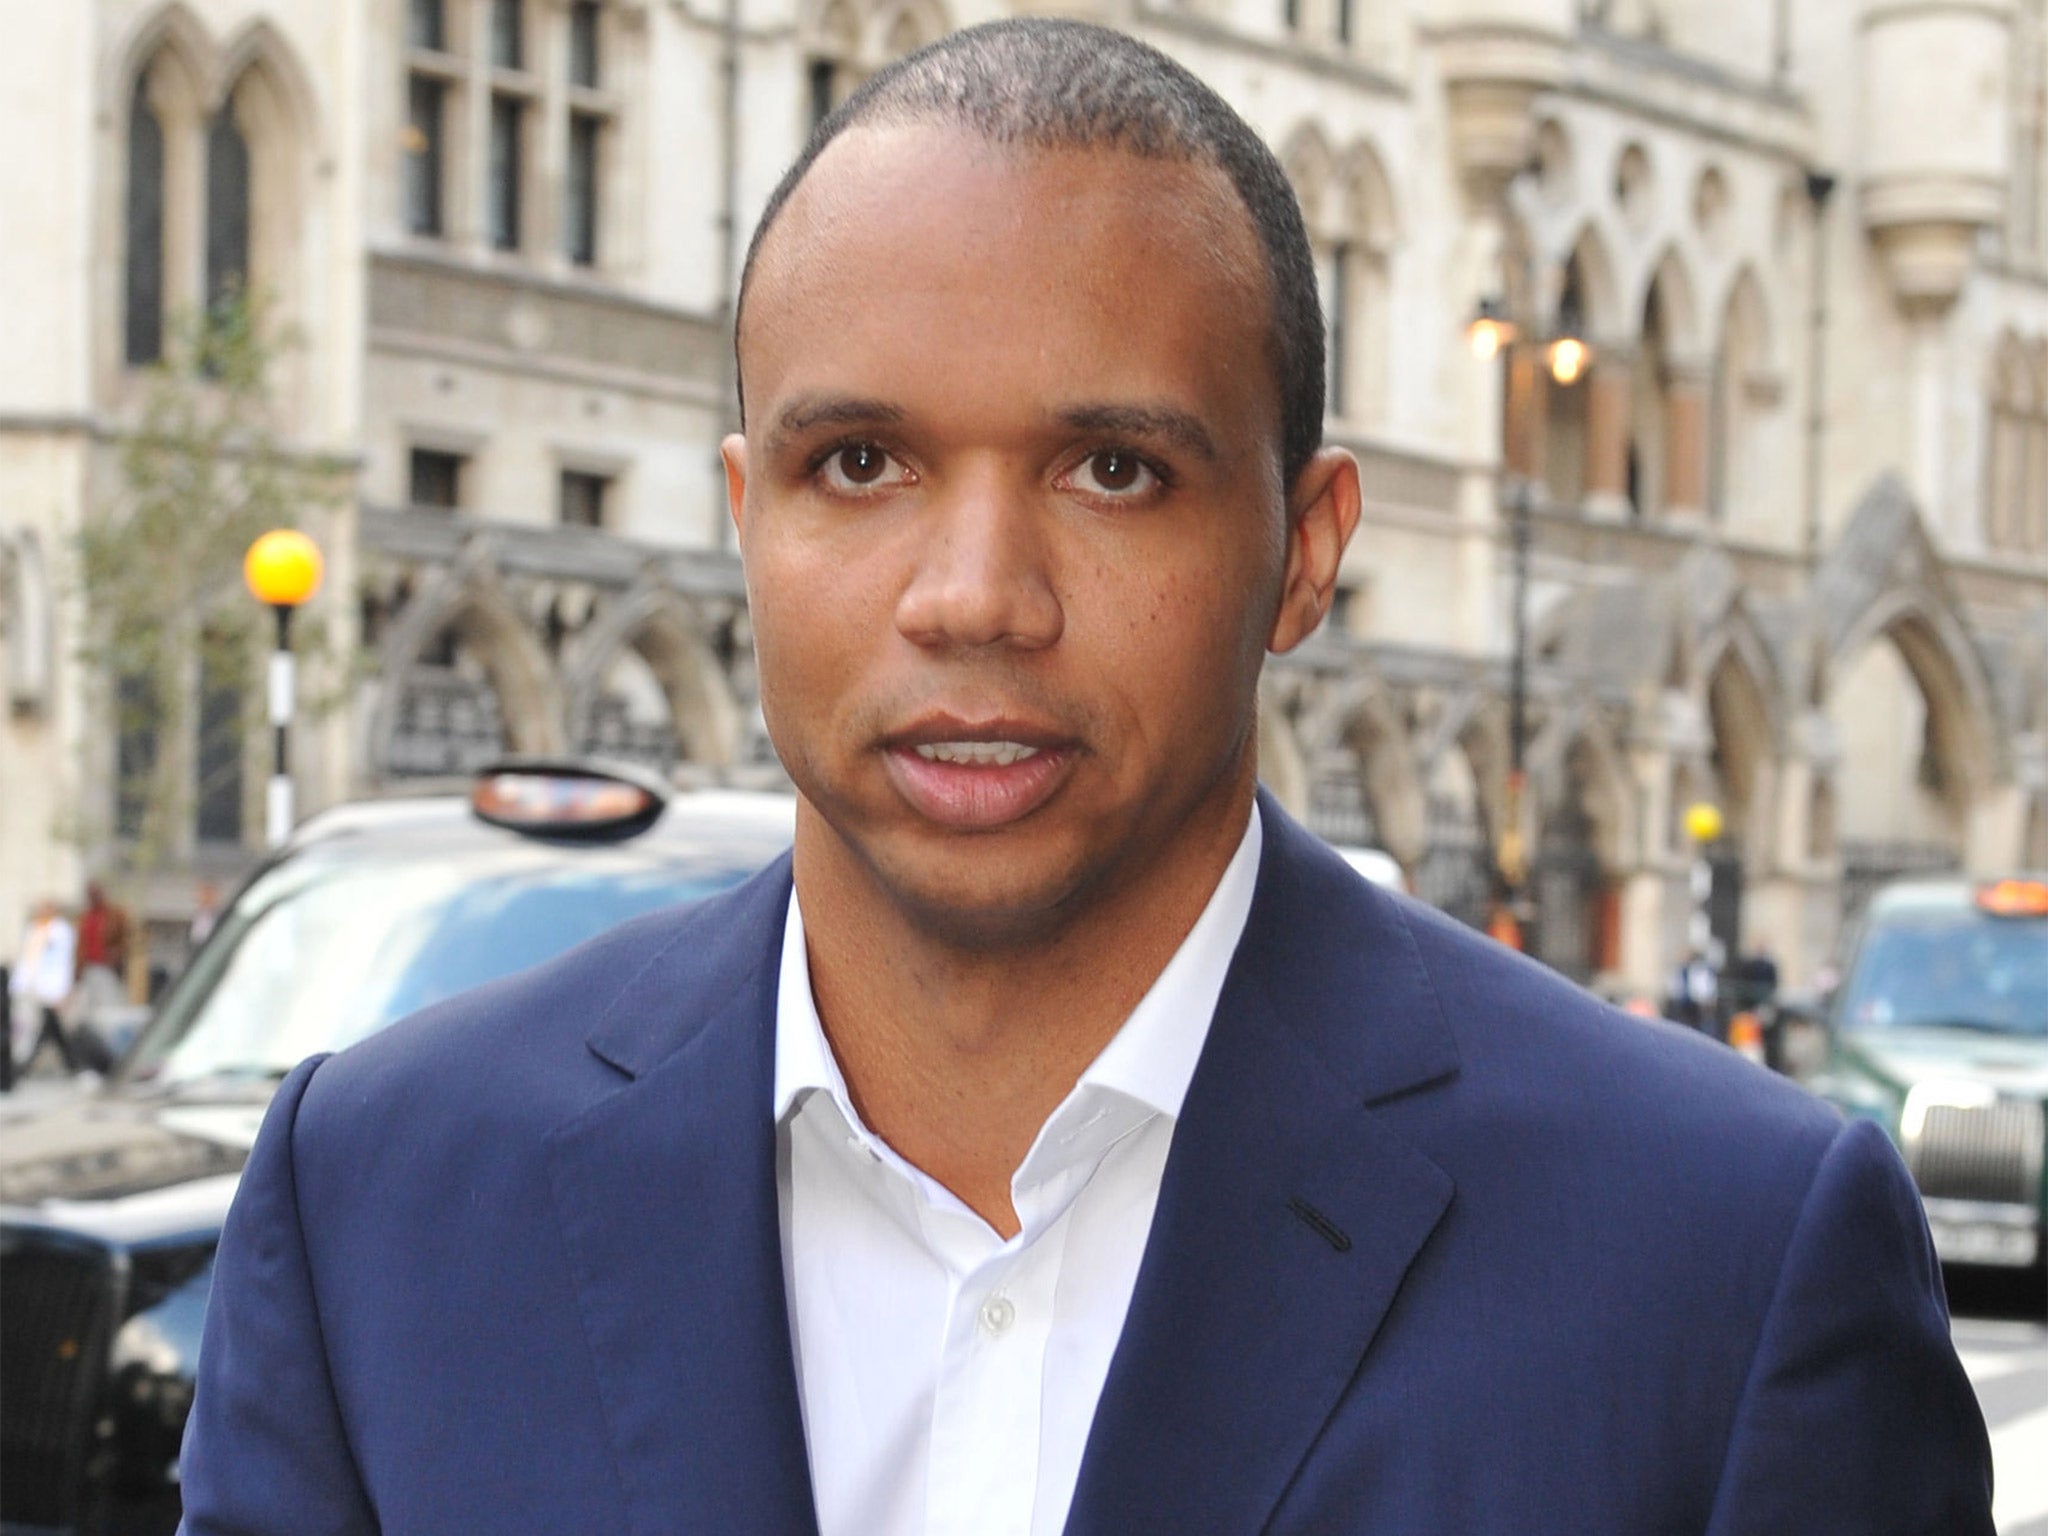 Professional poker player Phil Ivey lost his High Court case against the owners of London's Crockfords Club